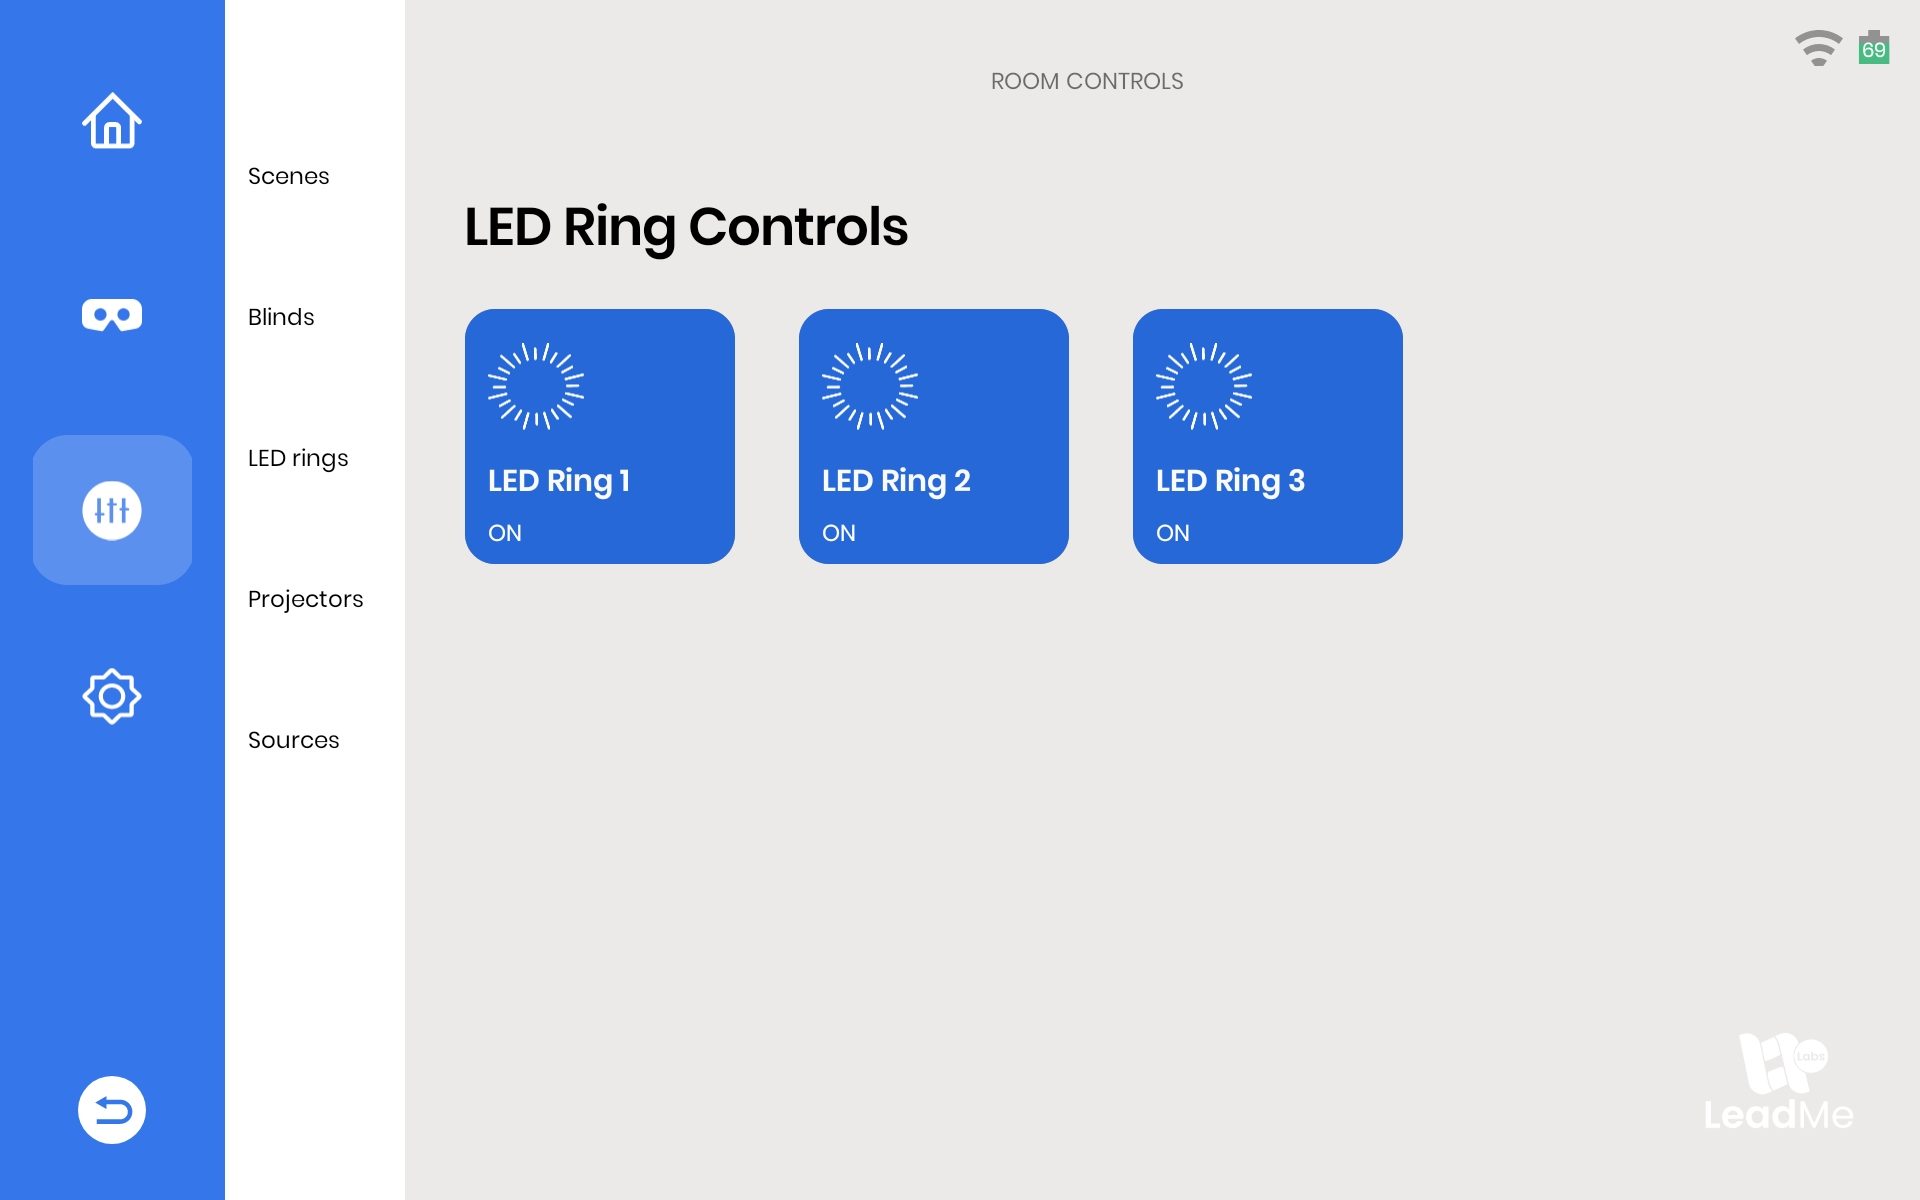 LED rings have been switched on using LeadMe